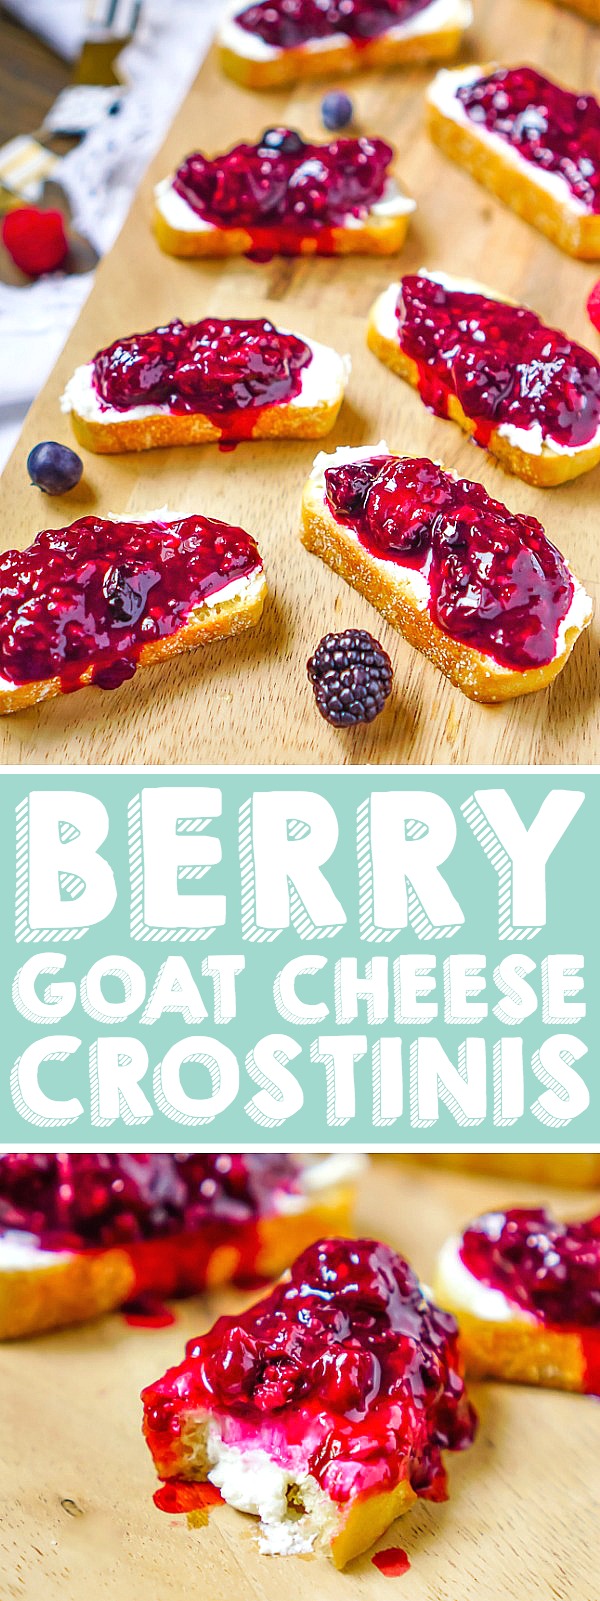 This Berry Goat Cheese Crostini recipe is an easy goat cheese appetizer that provides the perfect combination of creamy goat cheese, sweet three berry jam and a crunchy homemade crostini. | THE LOVE NERDS #newyearseverecipe #valentinesdayrecipe #bridalshowerrecipe #crostiniappetizer